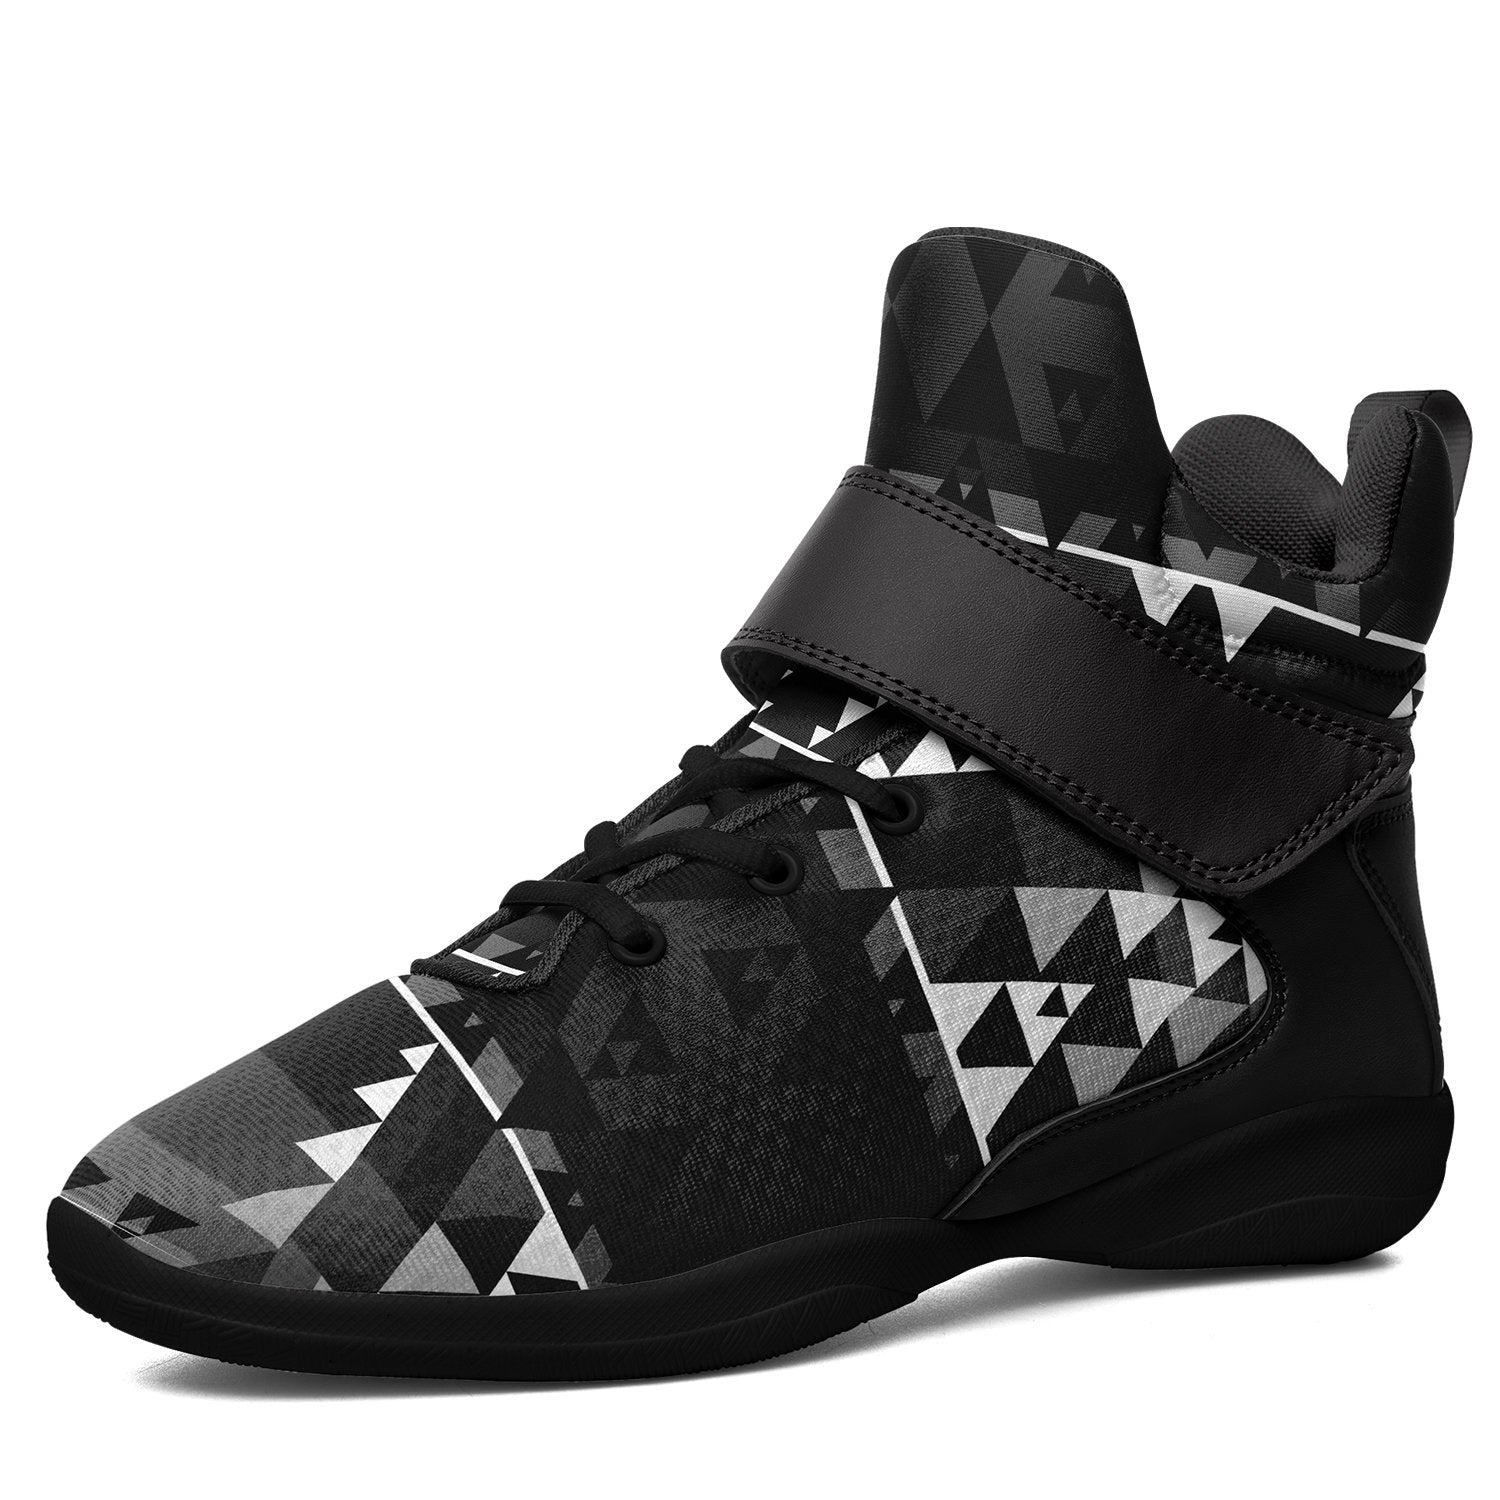 Writing on Stone Black and White Ipottaa Basketball / Sport High Top Shoes - Black Sole 49 Dzine US Men 7 / EUR 40 Black Sole with Black Strap 